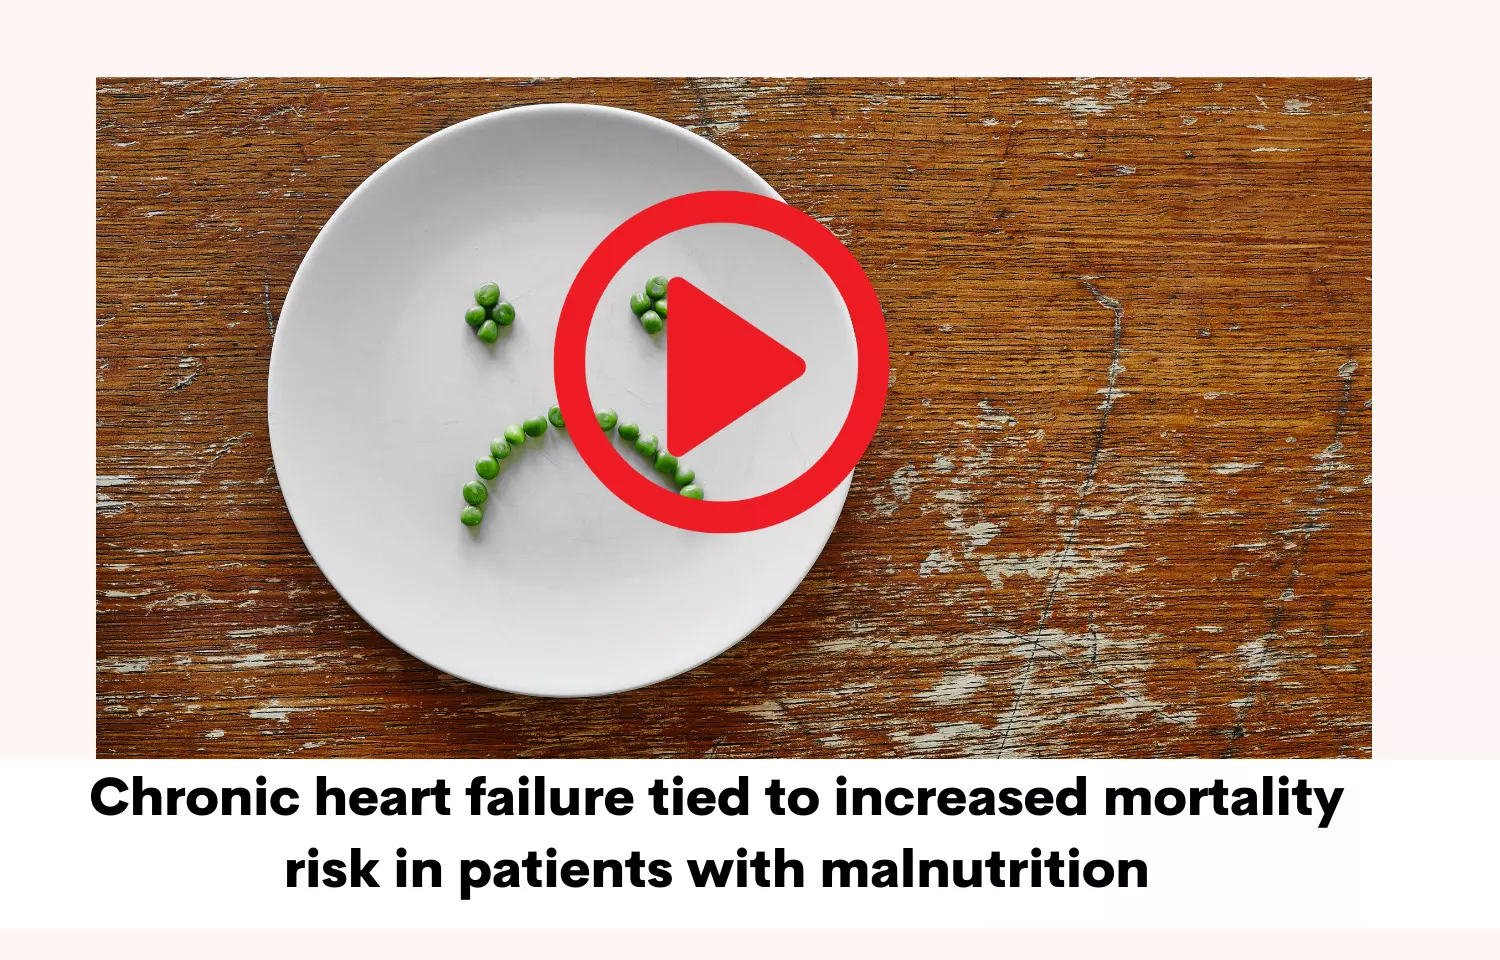 Chronic heart failure tied to increased mortality risk in patients with malnutrition